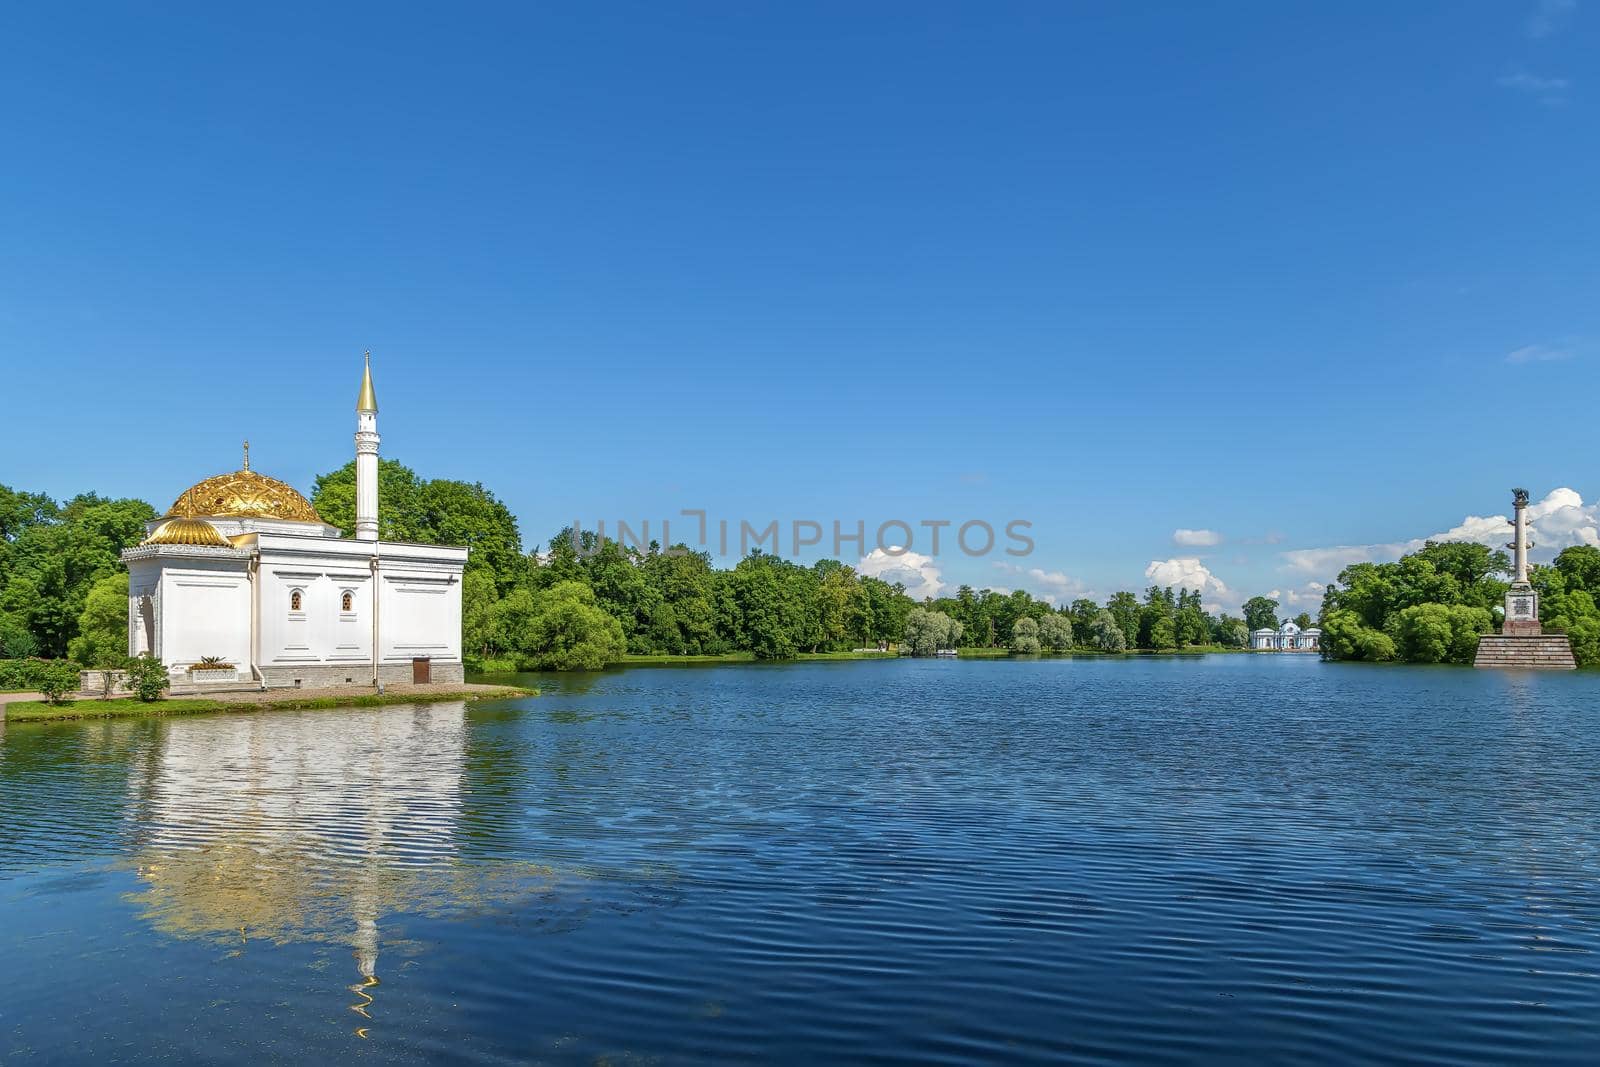 View of the Great Pond in Catherine Park, RussiaView of the Great Pond in Catherine Park, Russia by borisb17